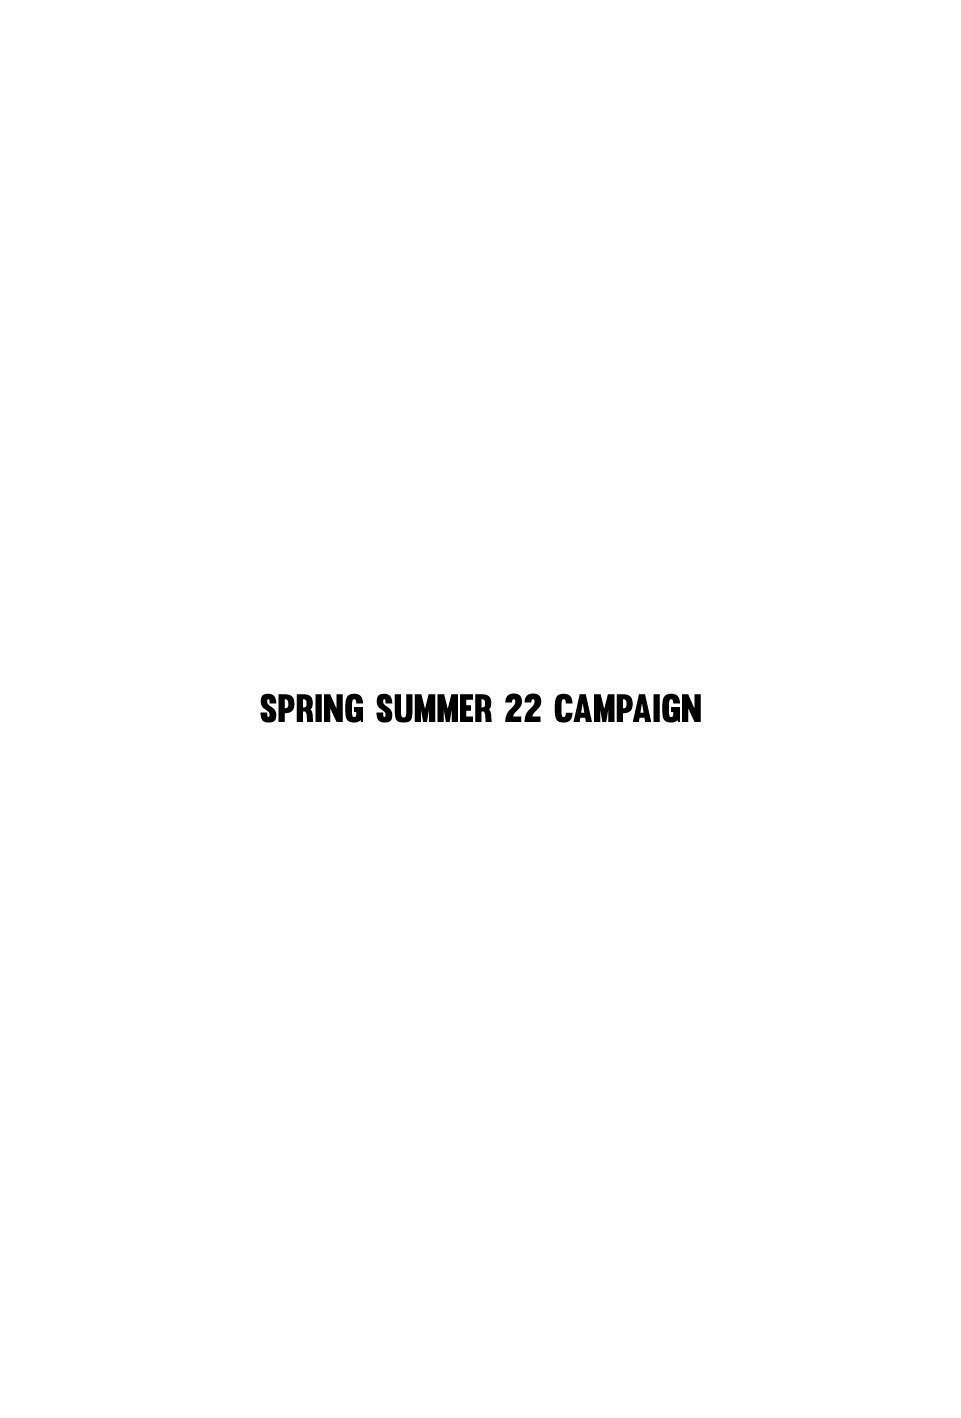 SPRING SUMMER 22 CAMPAIGN